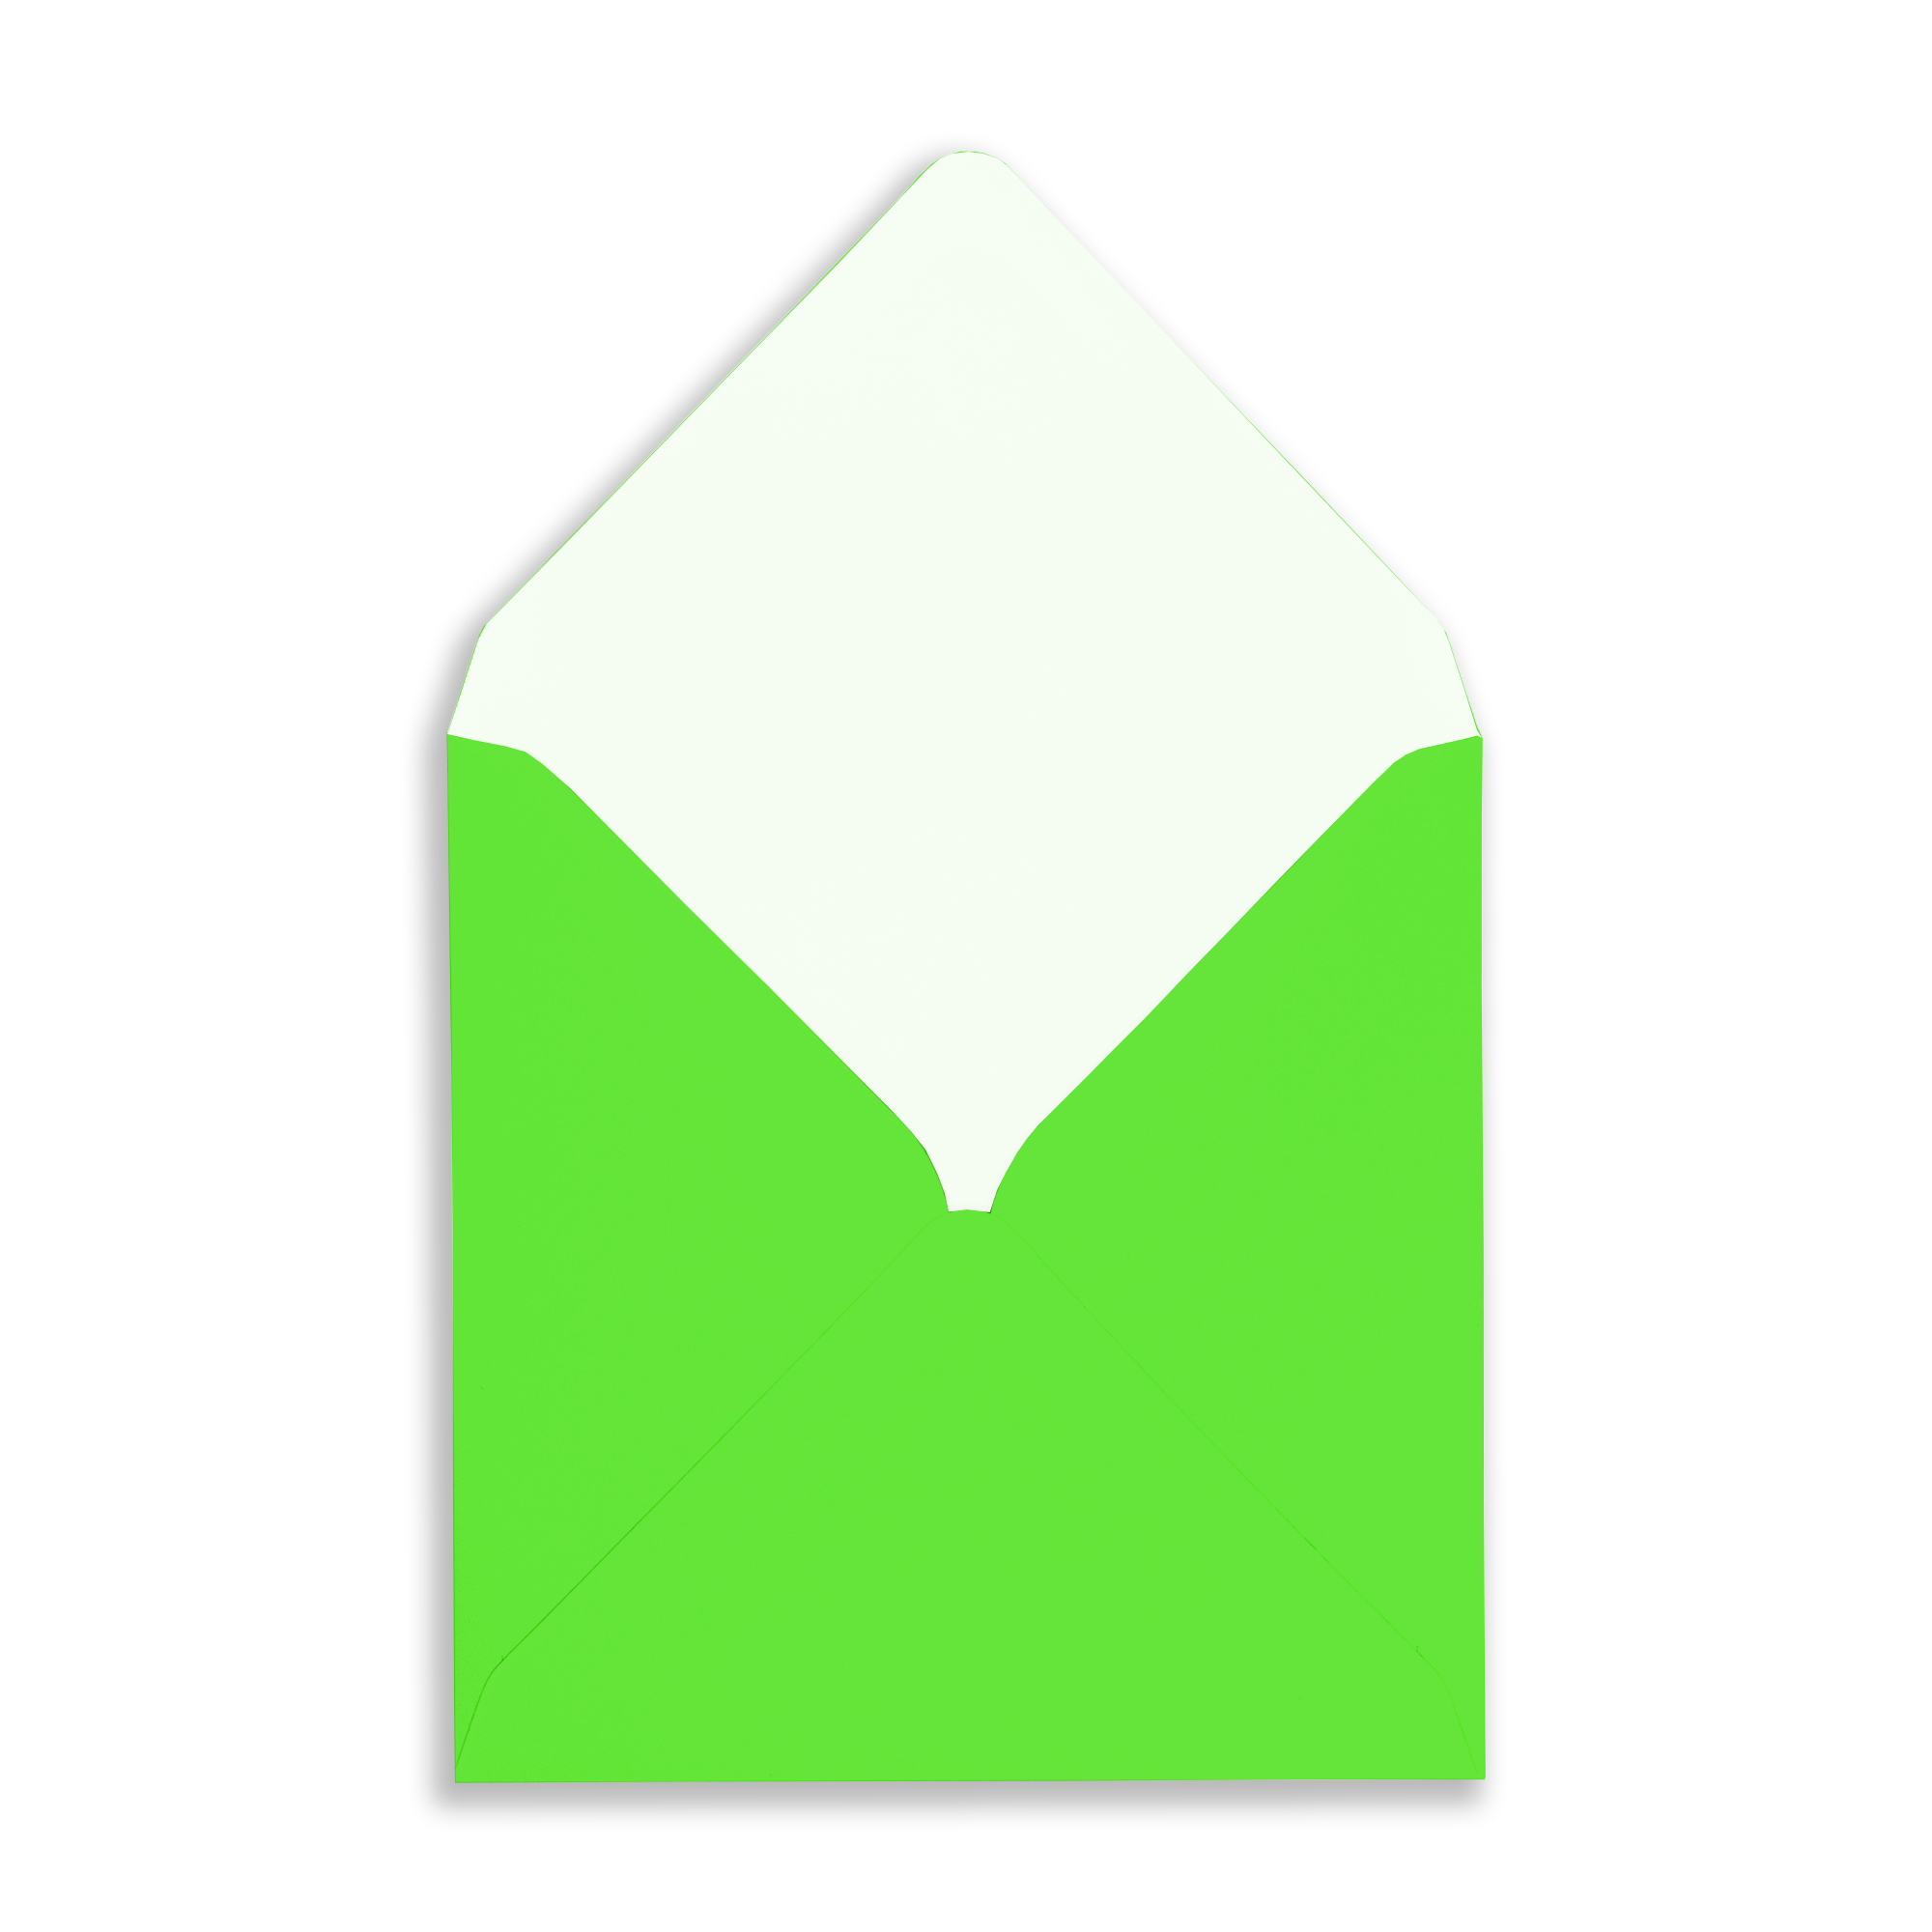 SQ-neon-green_Envelope_OpenFlap